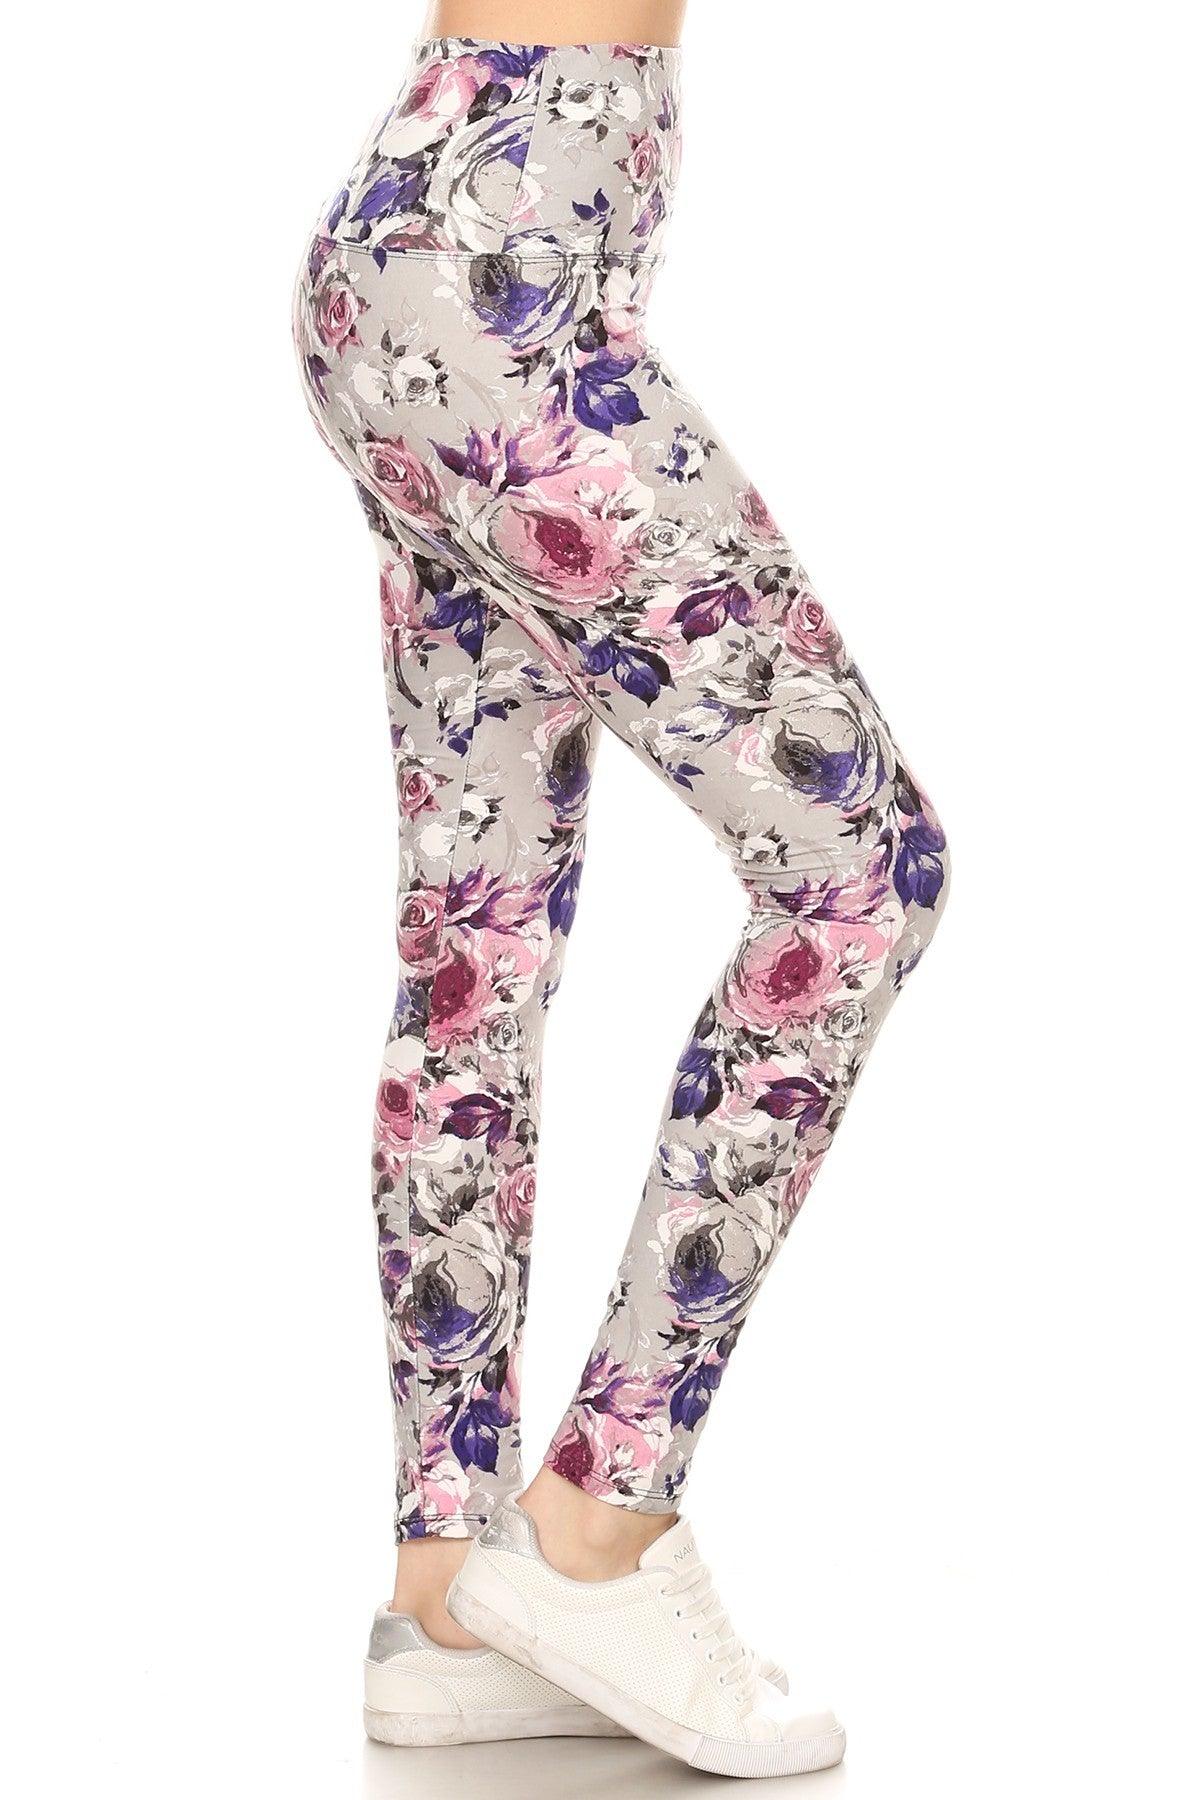 5-inch Long Yoga Style Banded Lined Floral Printed Knit Legging With High Waist - Boutique Fashionistah